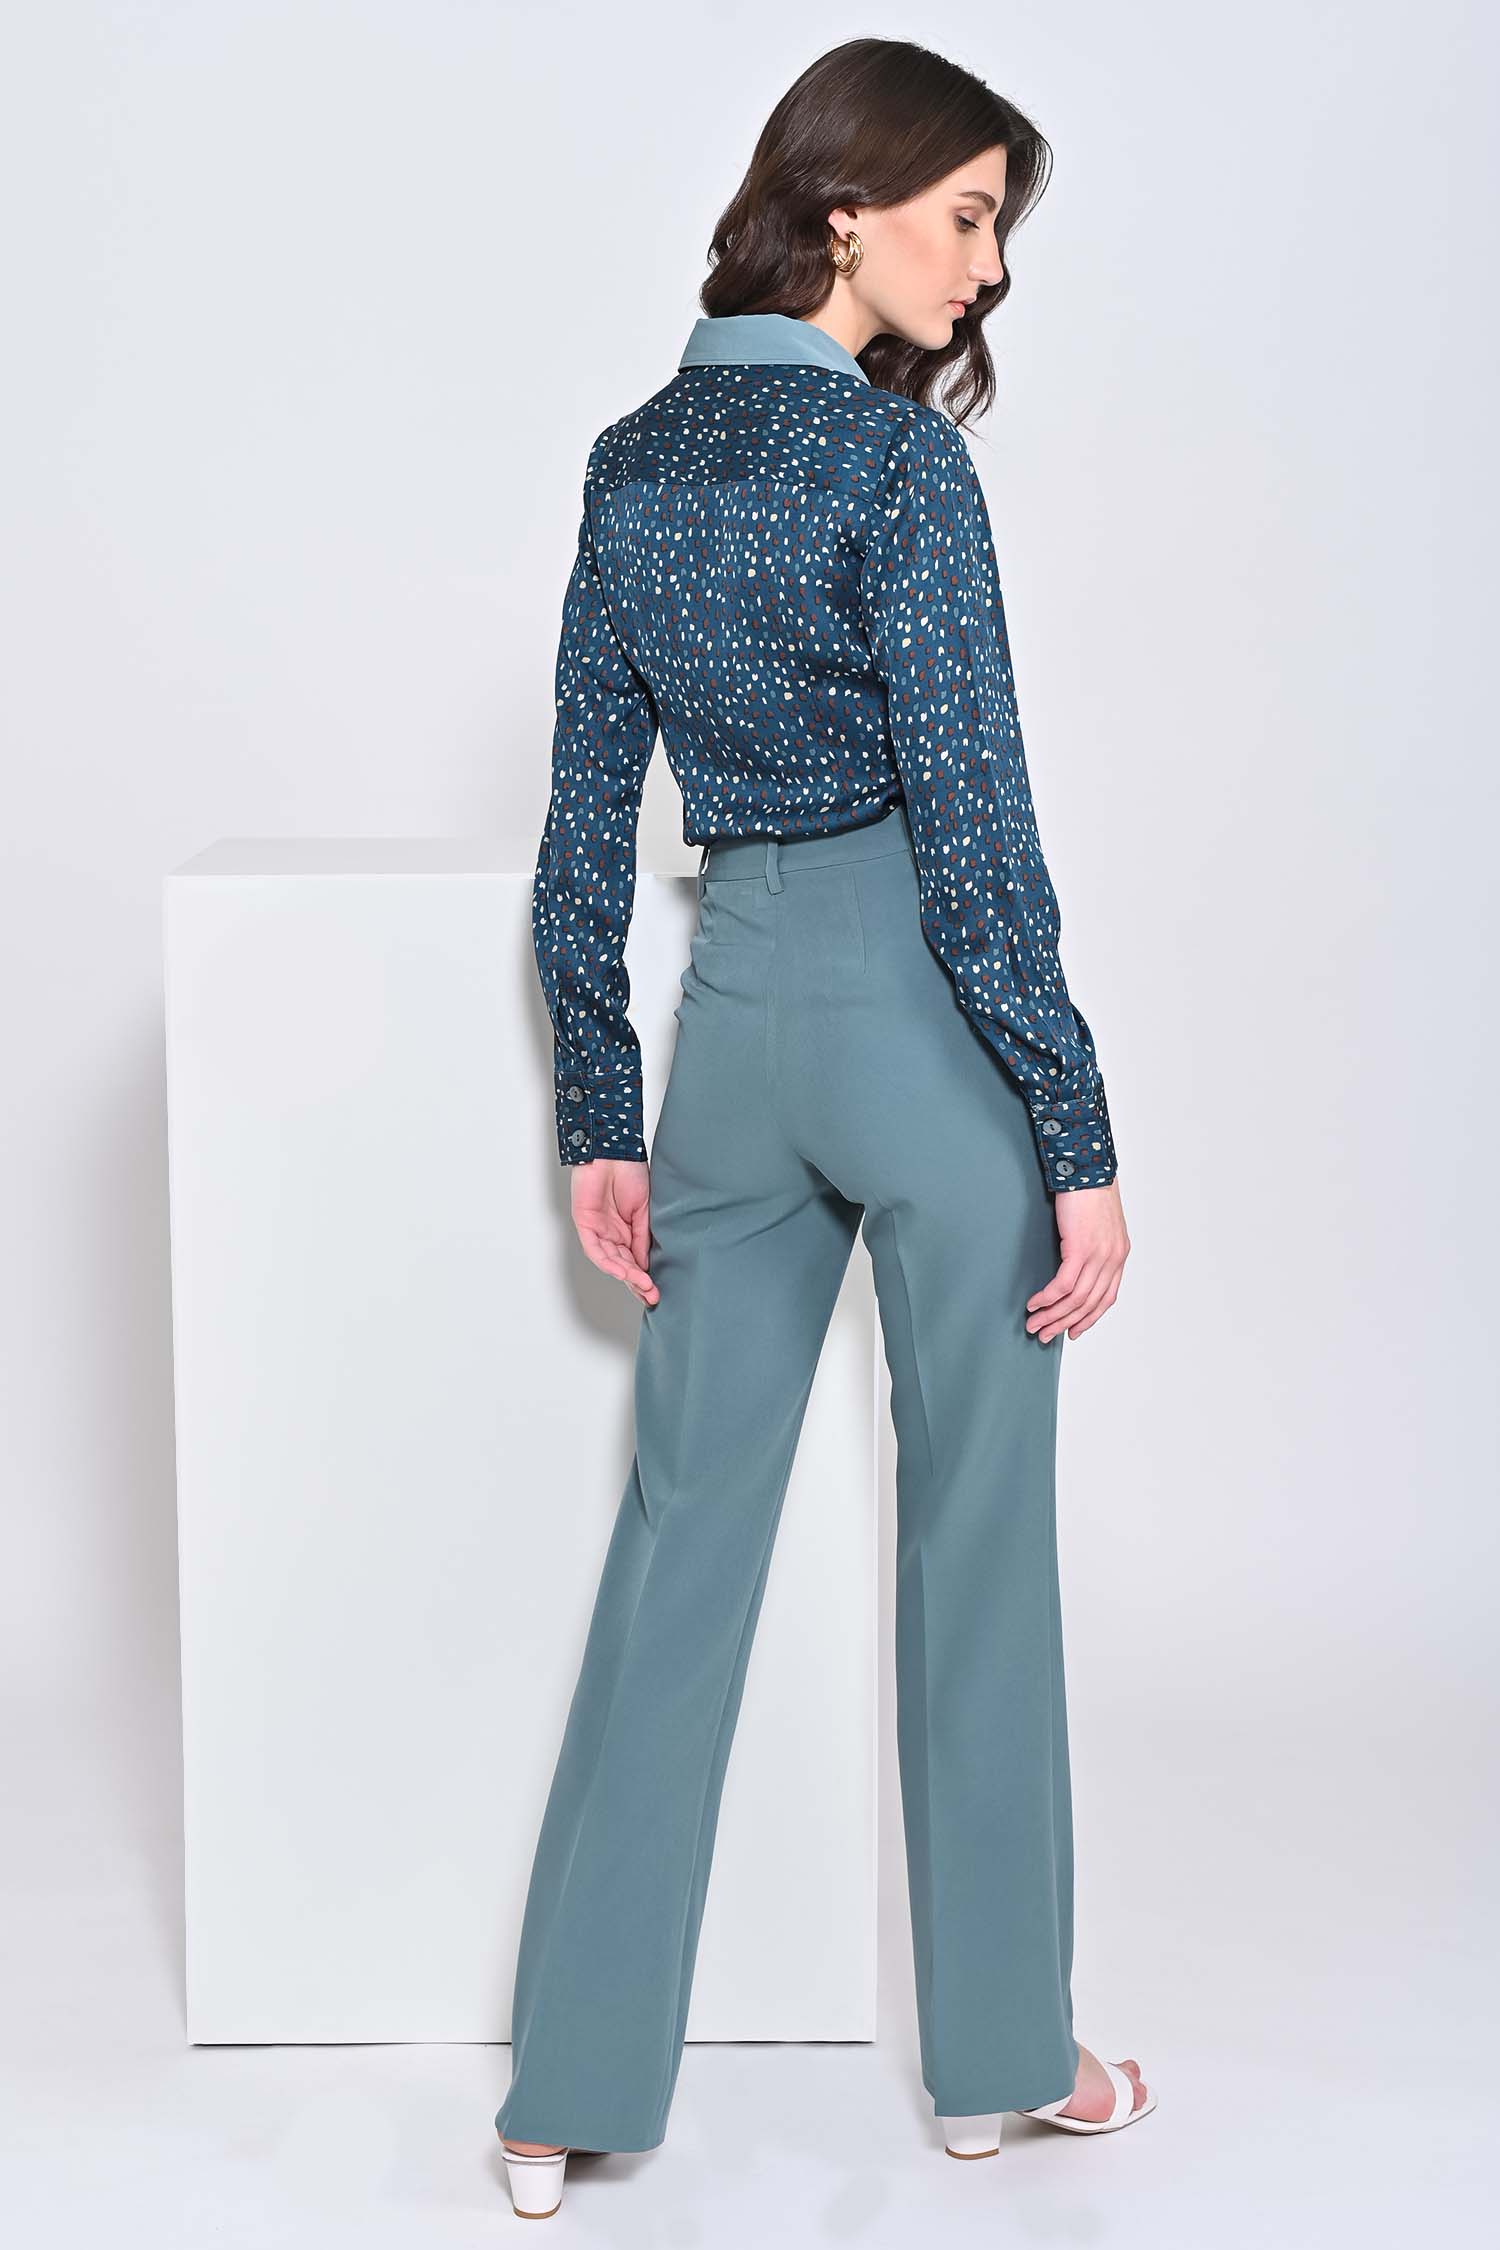 Neptune Green Flared Trousers